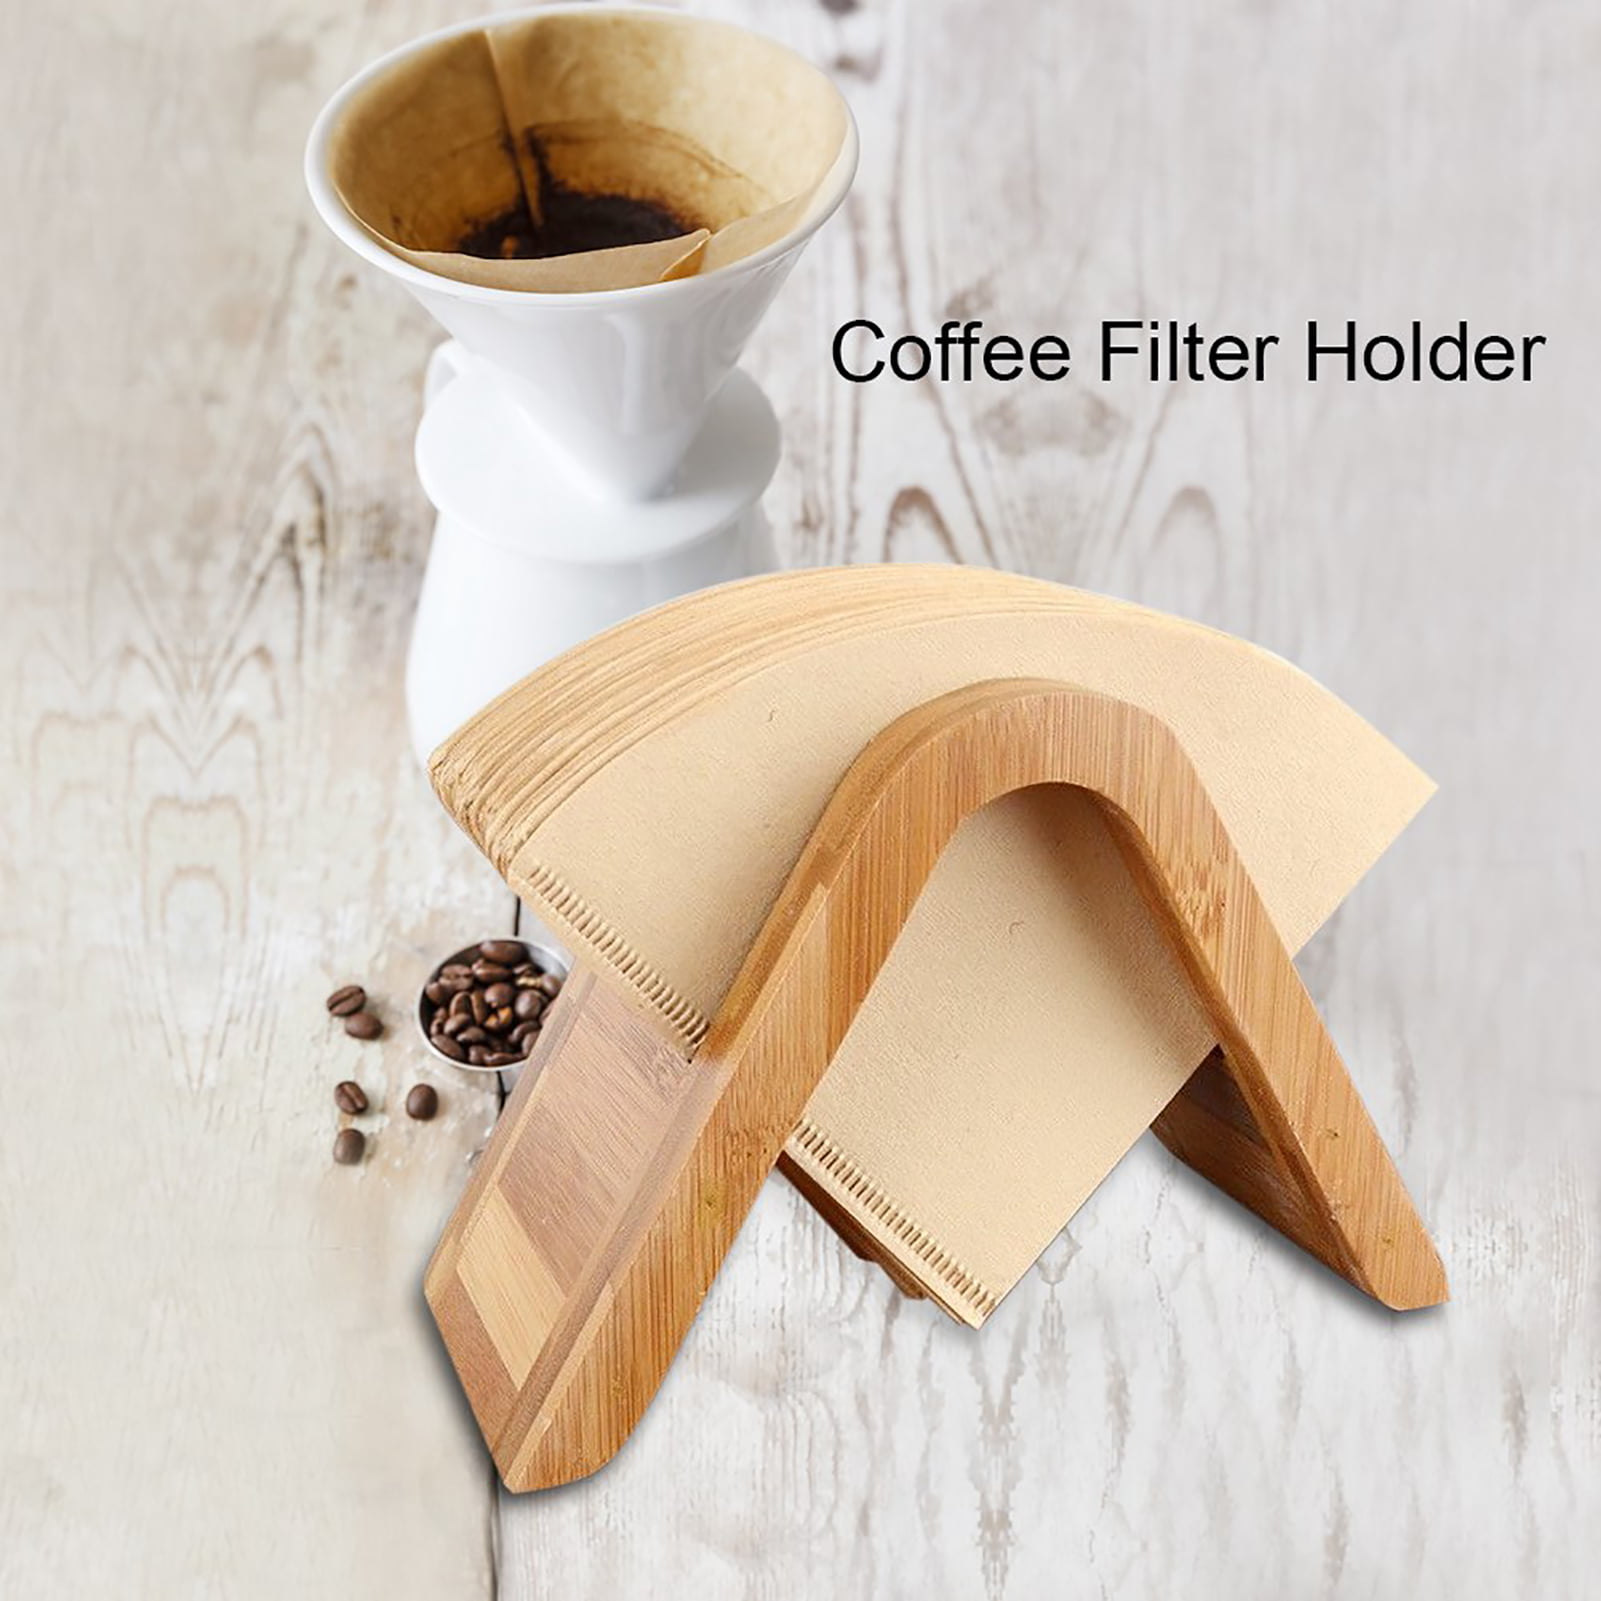 Colorful Stainless Steel Filtering Papers Storage Rack Elegant Display Stand for Home Office Cafe Coffee Filter Holder Green